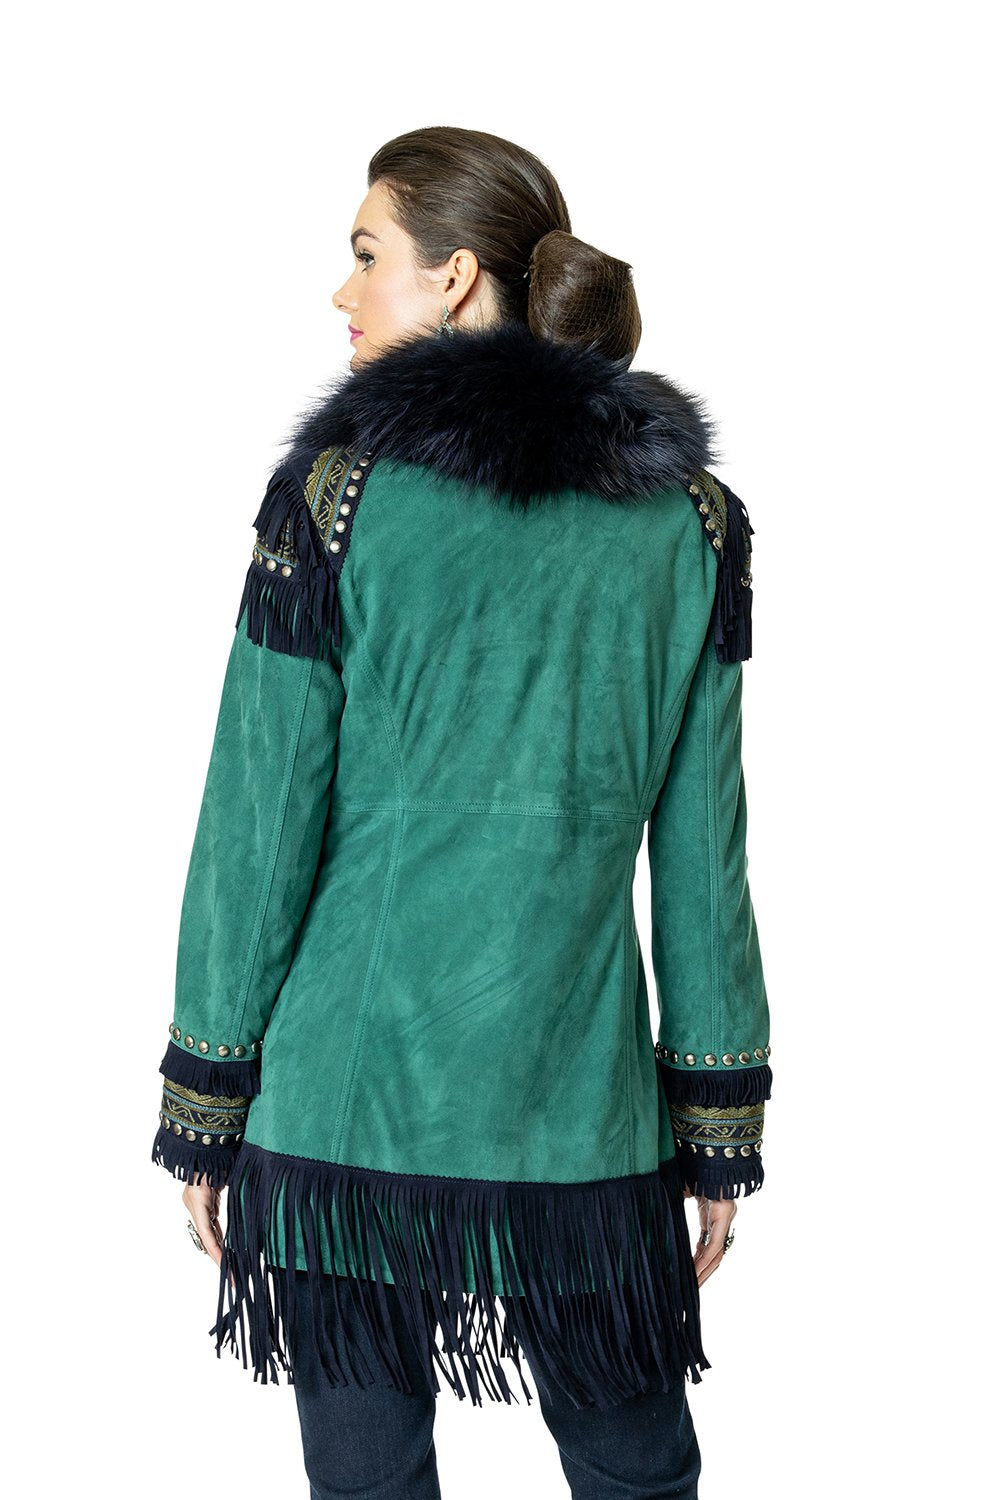 Load image into Gallery viewer, DDR Sandia Pass Teal Jacket 6Whiskey six whisky knee-length leather fringe coat Taos Holiday collection C2756
